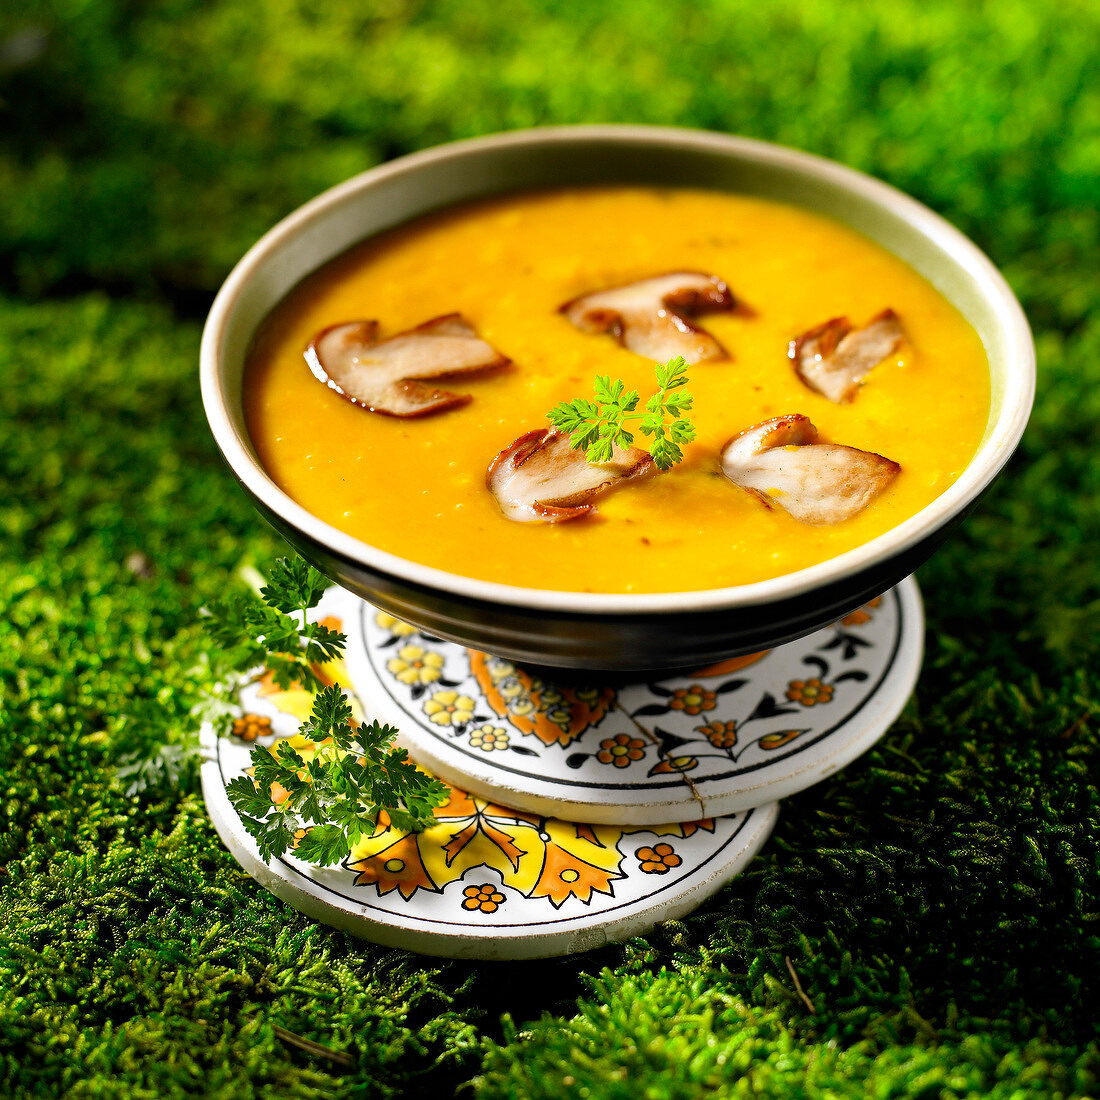 Cream of pumpkin soup with ceps